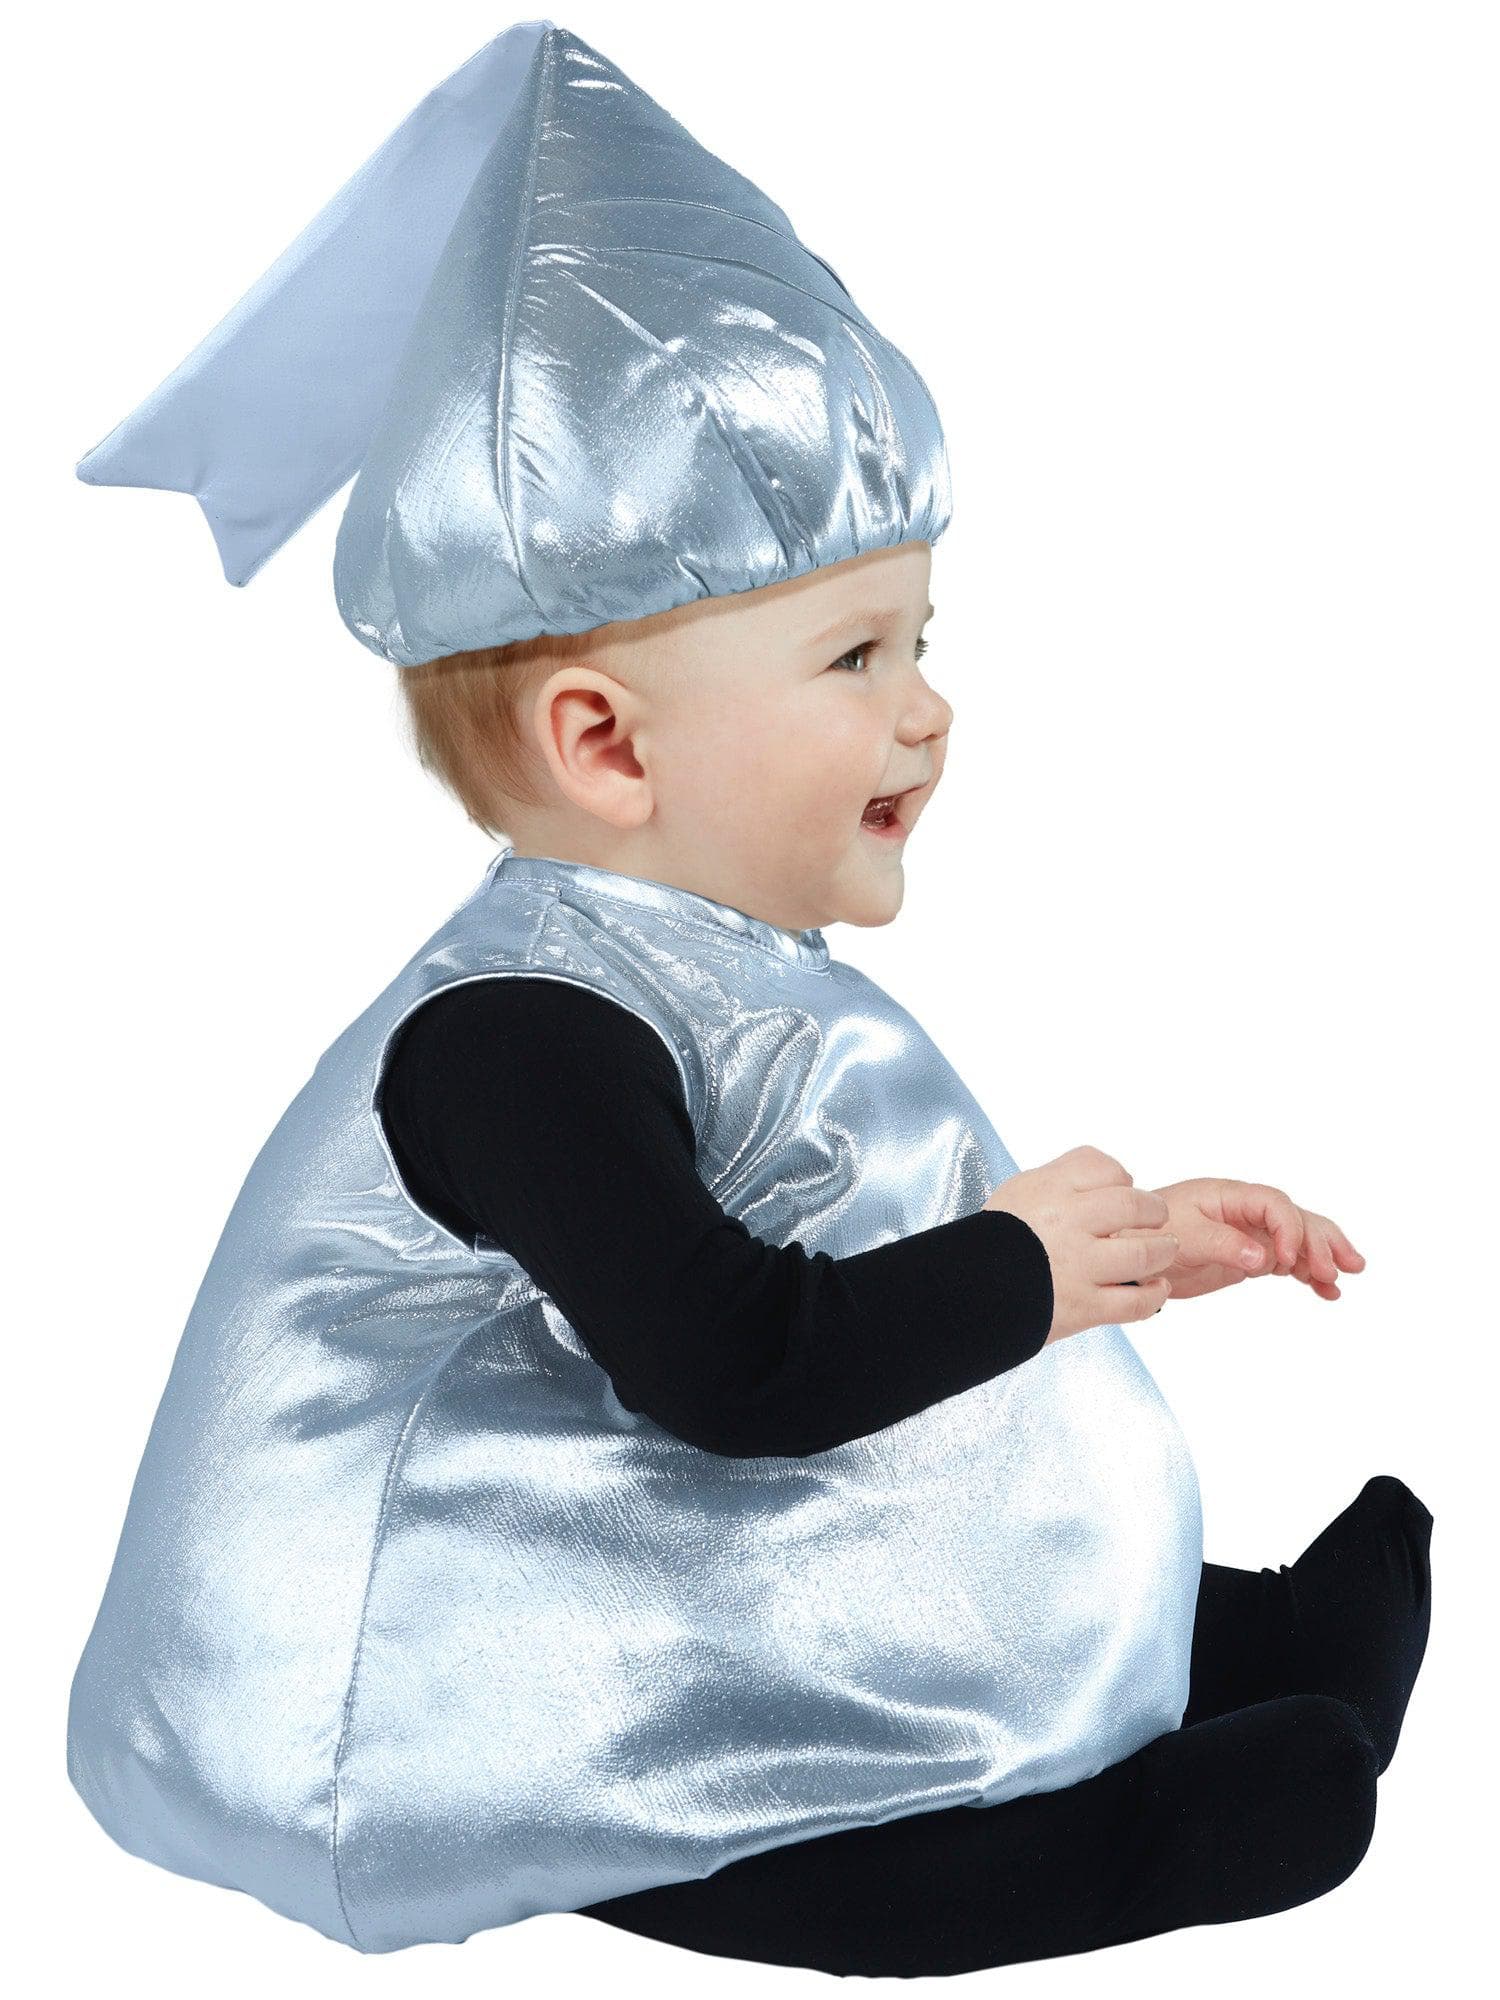 Hershey Kisses Baby/Toddler Costume - costumes.com